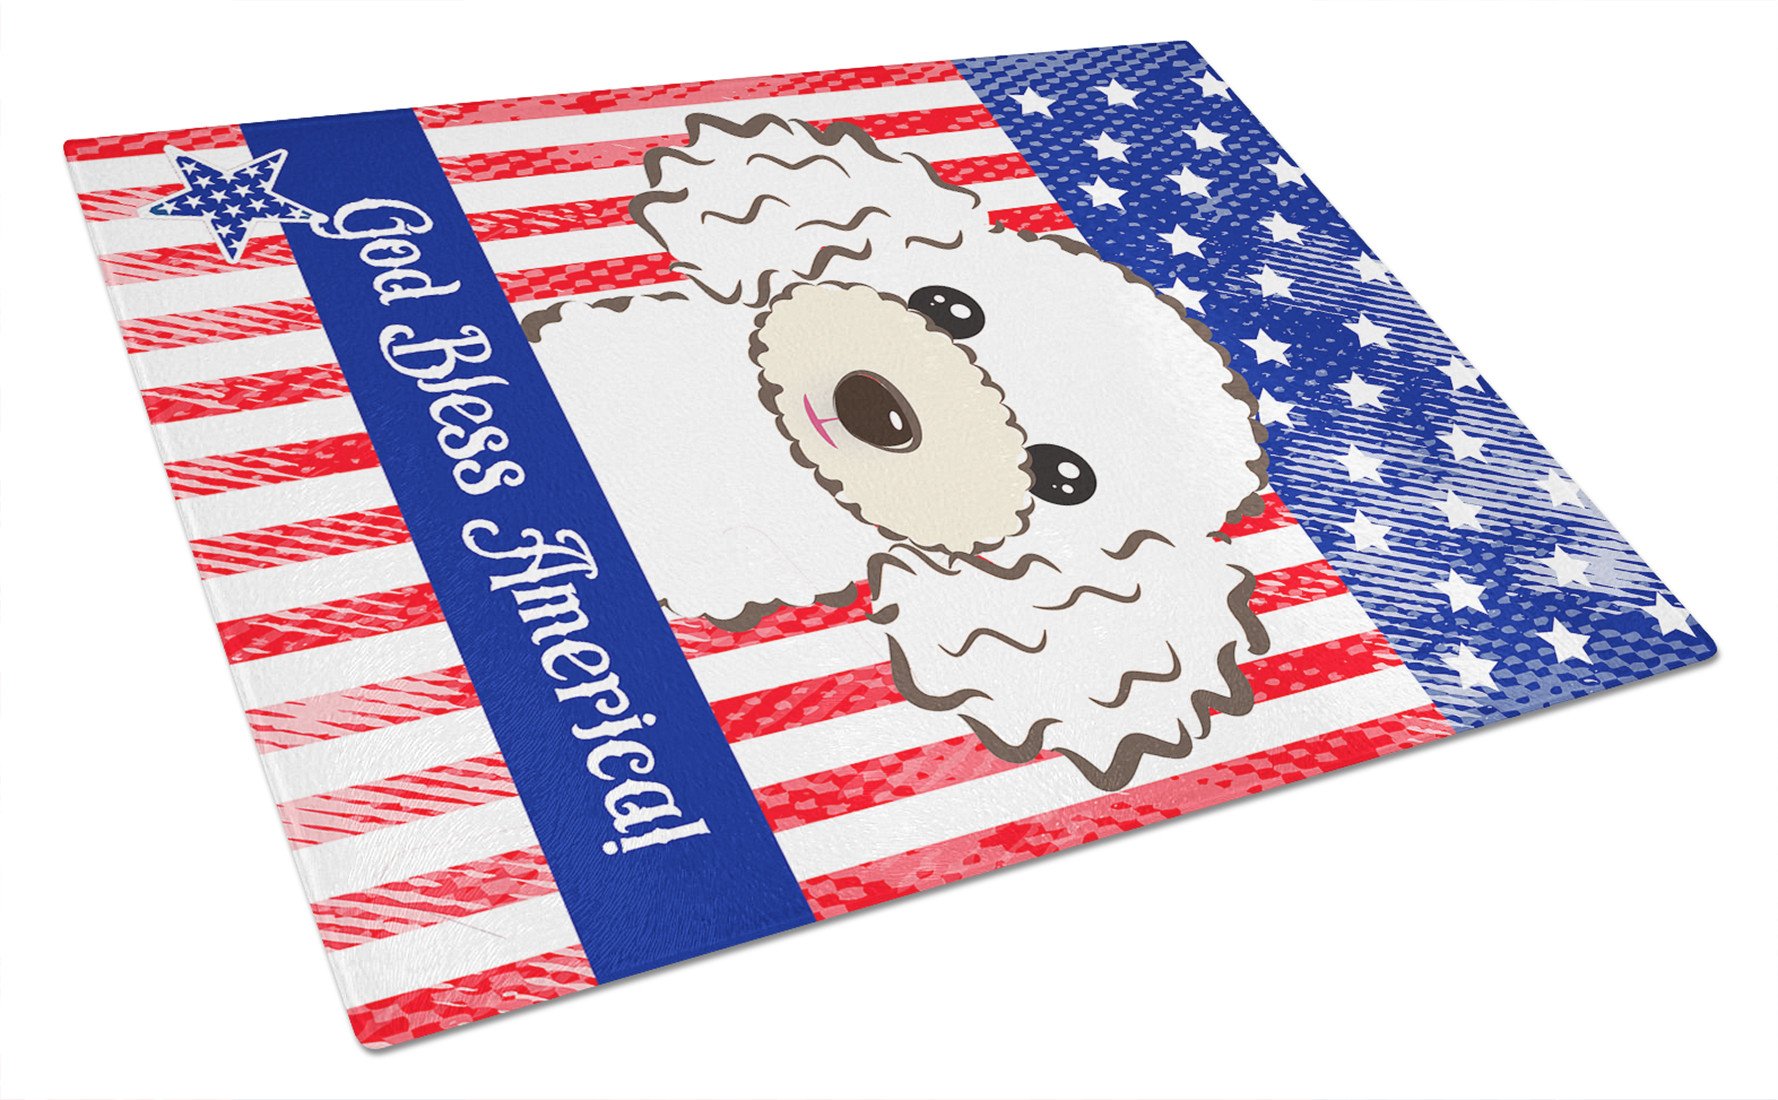 God Bless American Flag with White Poodle Glass Cutting Board Large BB2187LCB by Caroline's Treasures